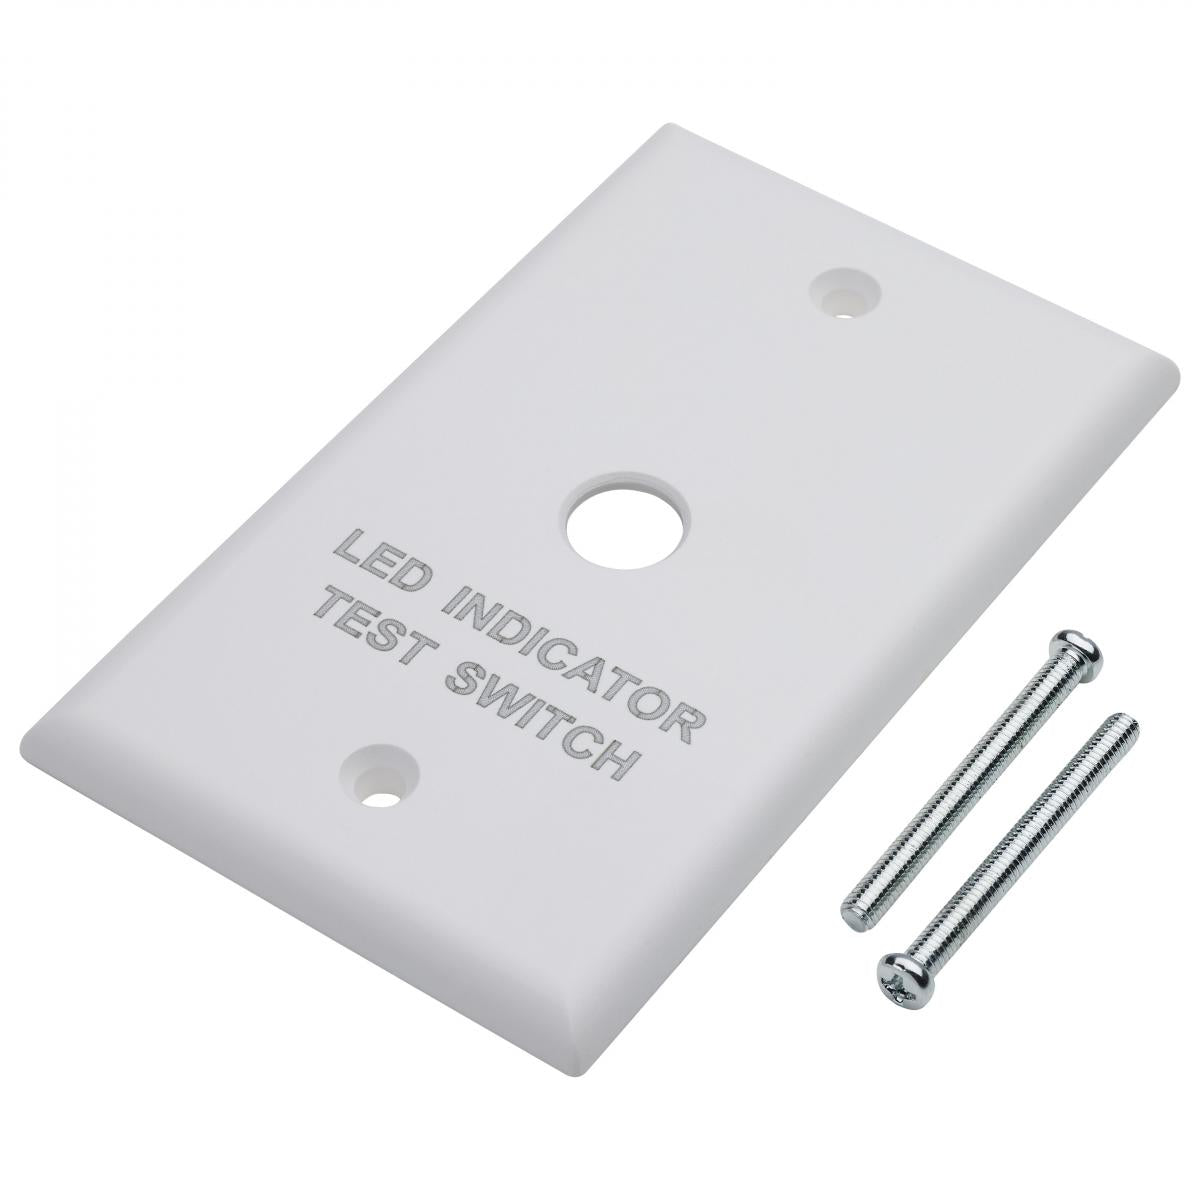 Emergency Remote Test Switch, Single Gang Plate, White Finish